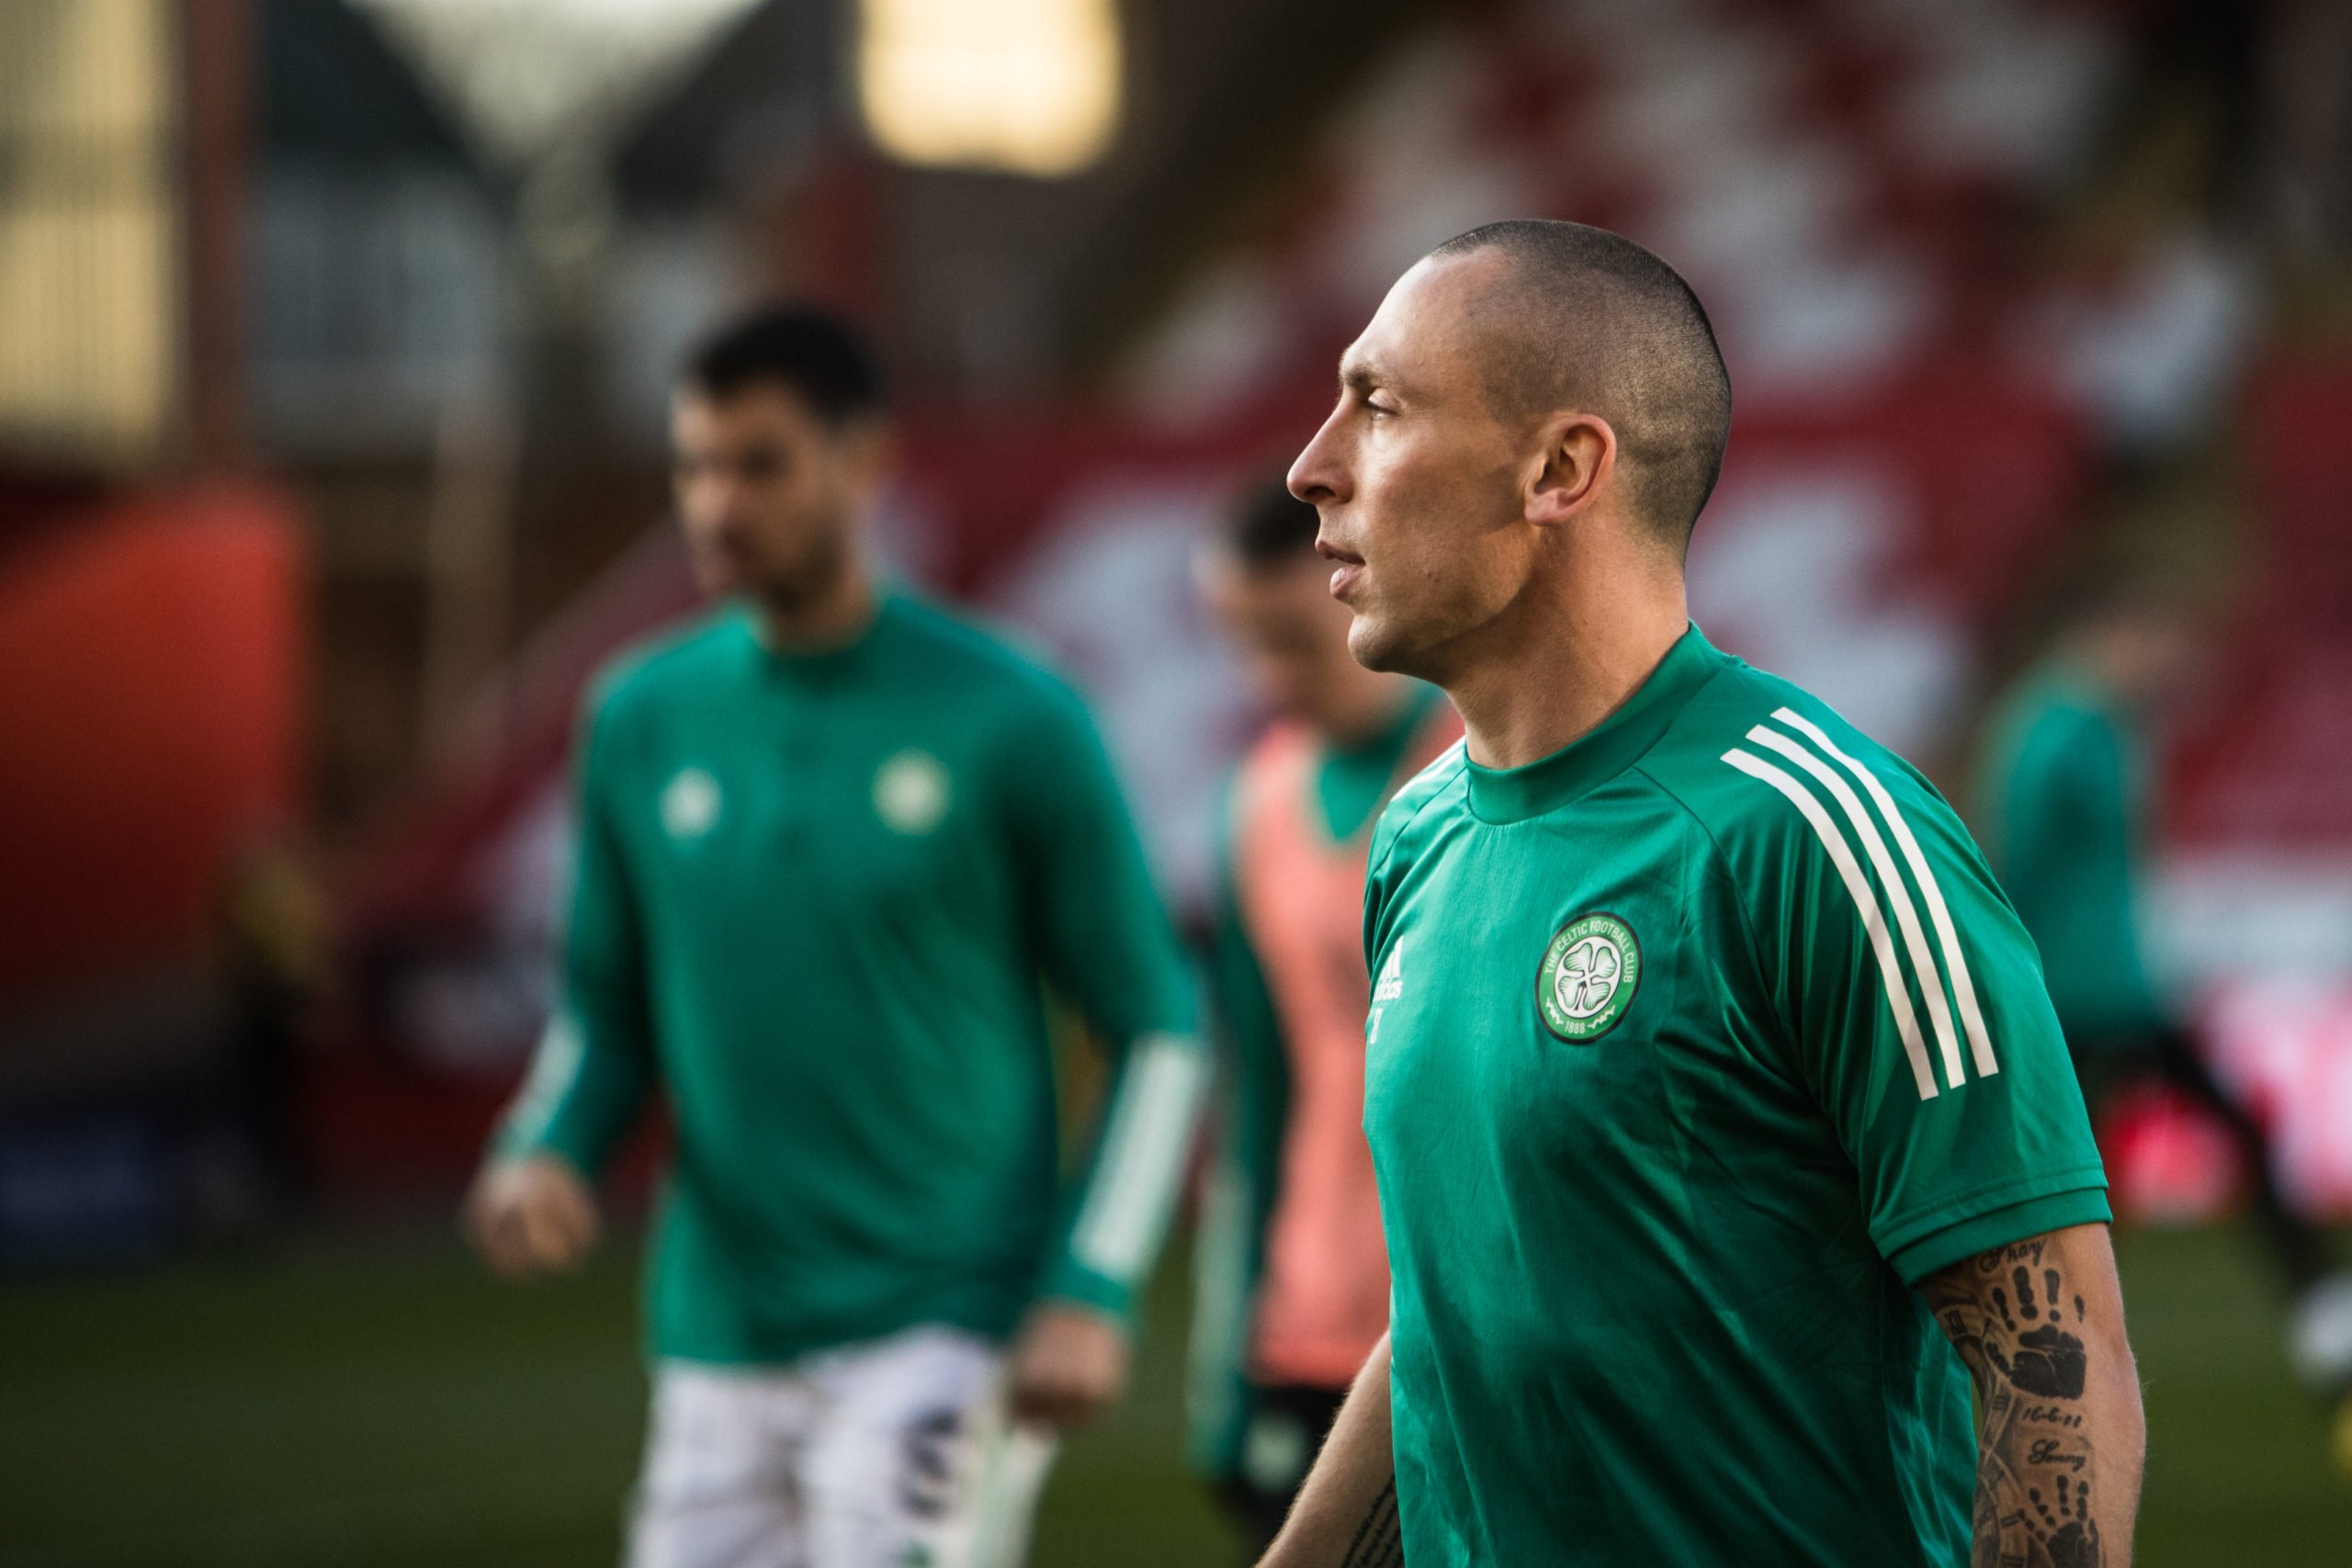 "Very funny and cheeky!"; Donati gives insider perspective on Celtic legend Scott Brown